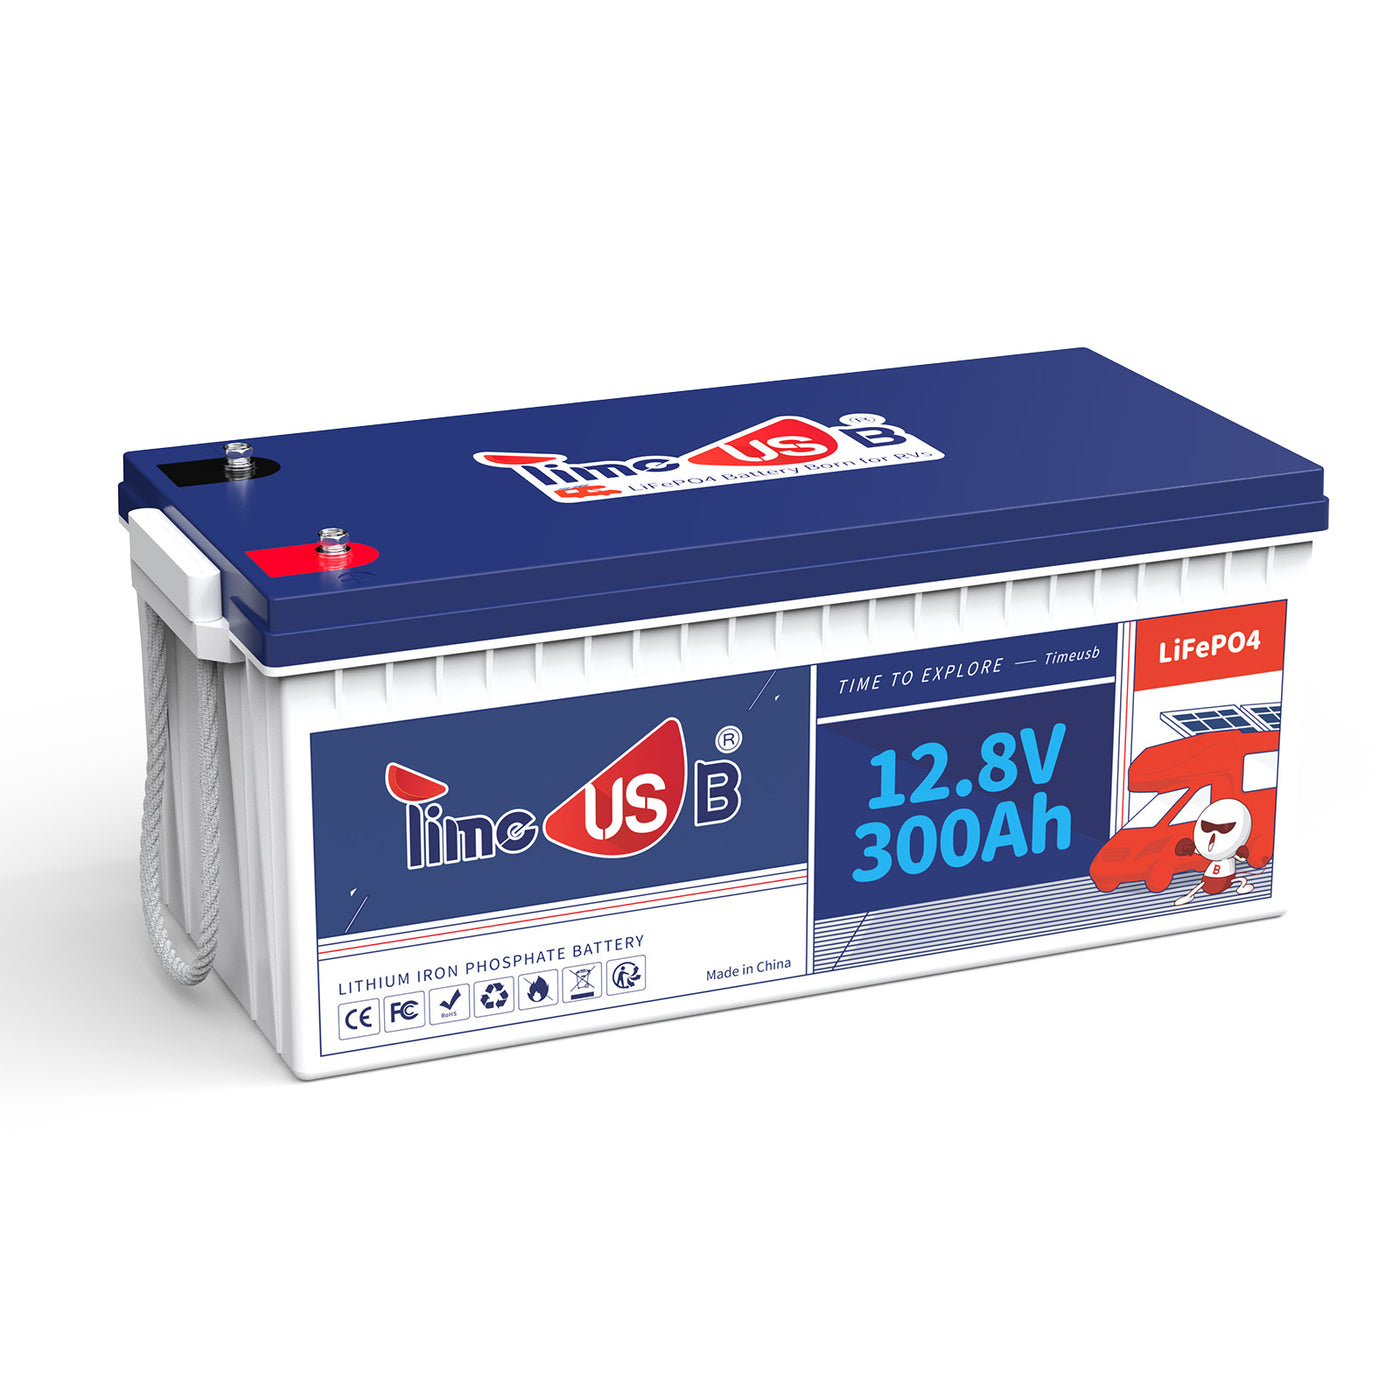 [Final: ＄607.99] Timeusb 12V 300Ah LiFePO4 Battery, 3840 Wh & 200A BMS